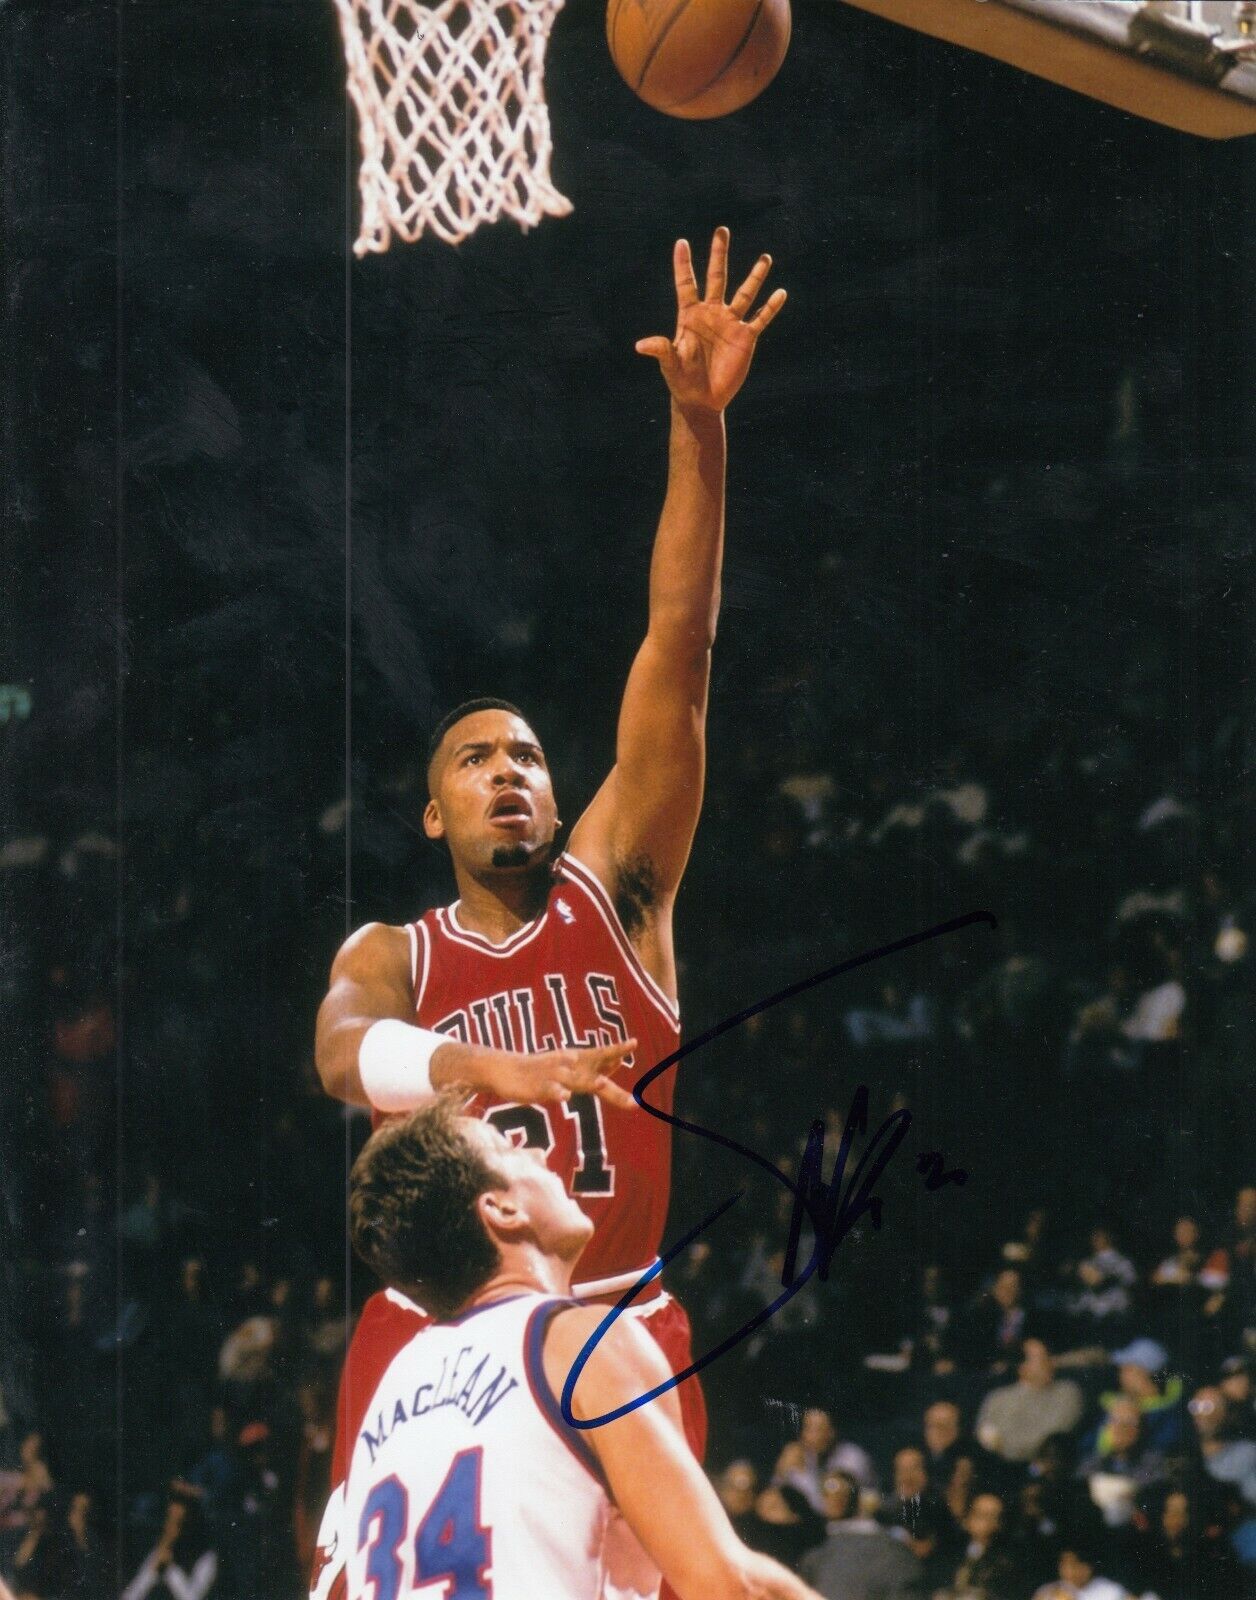 STACEY KING signed (CHICAGO BULLS) BASKETBALL *LAST DANCE* 8X10 Photo Poster painting W/COA #2